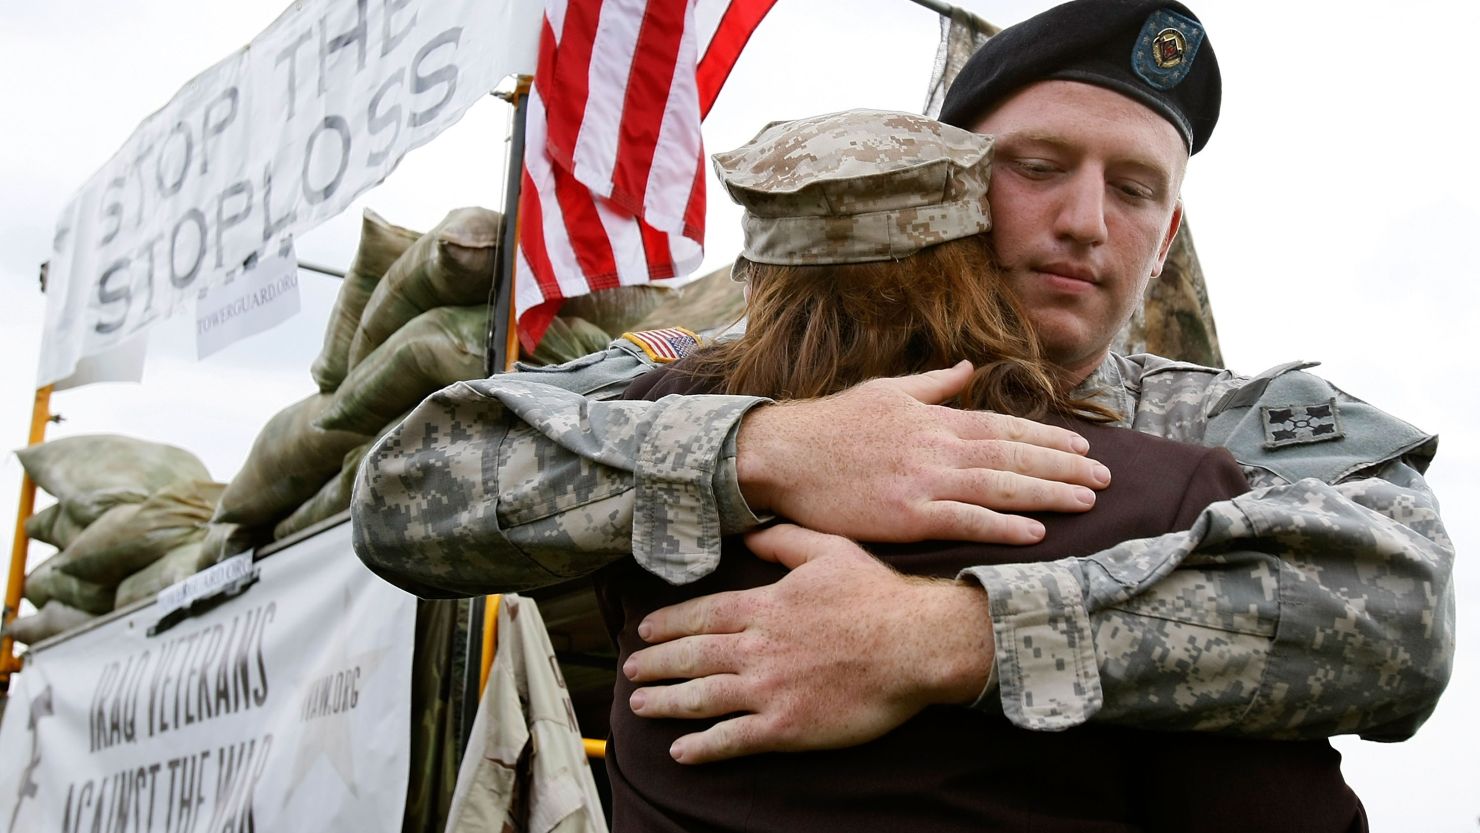 Americans on Veterans Day should remember that cutting benefits would only add to troops' stress, Jonathan Raab says.